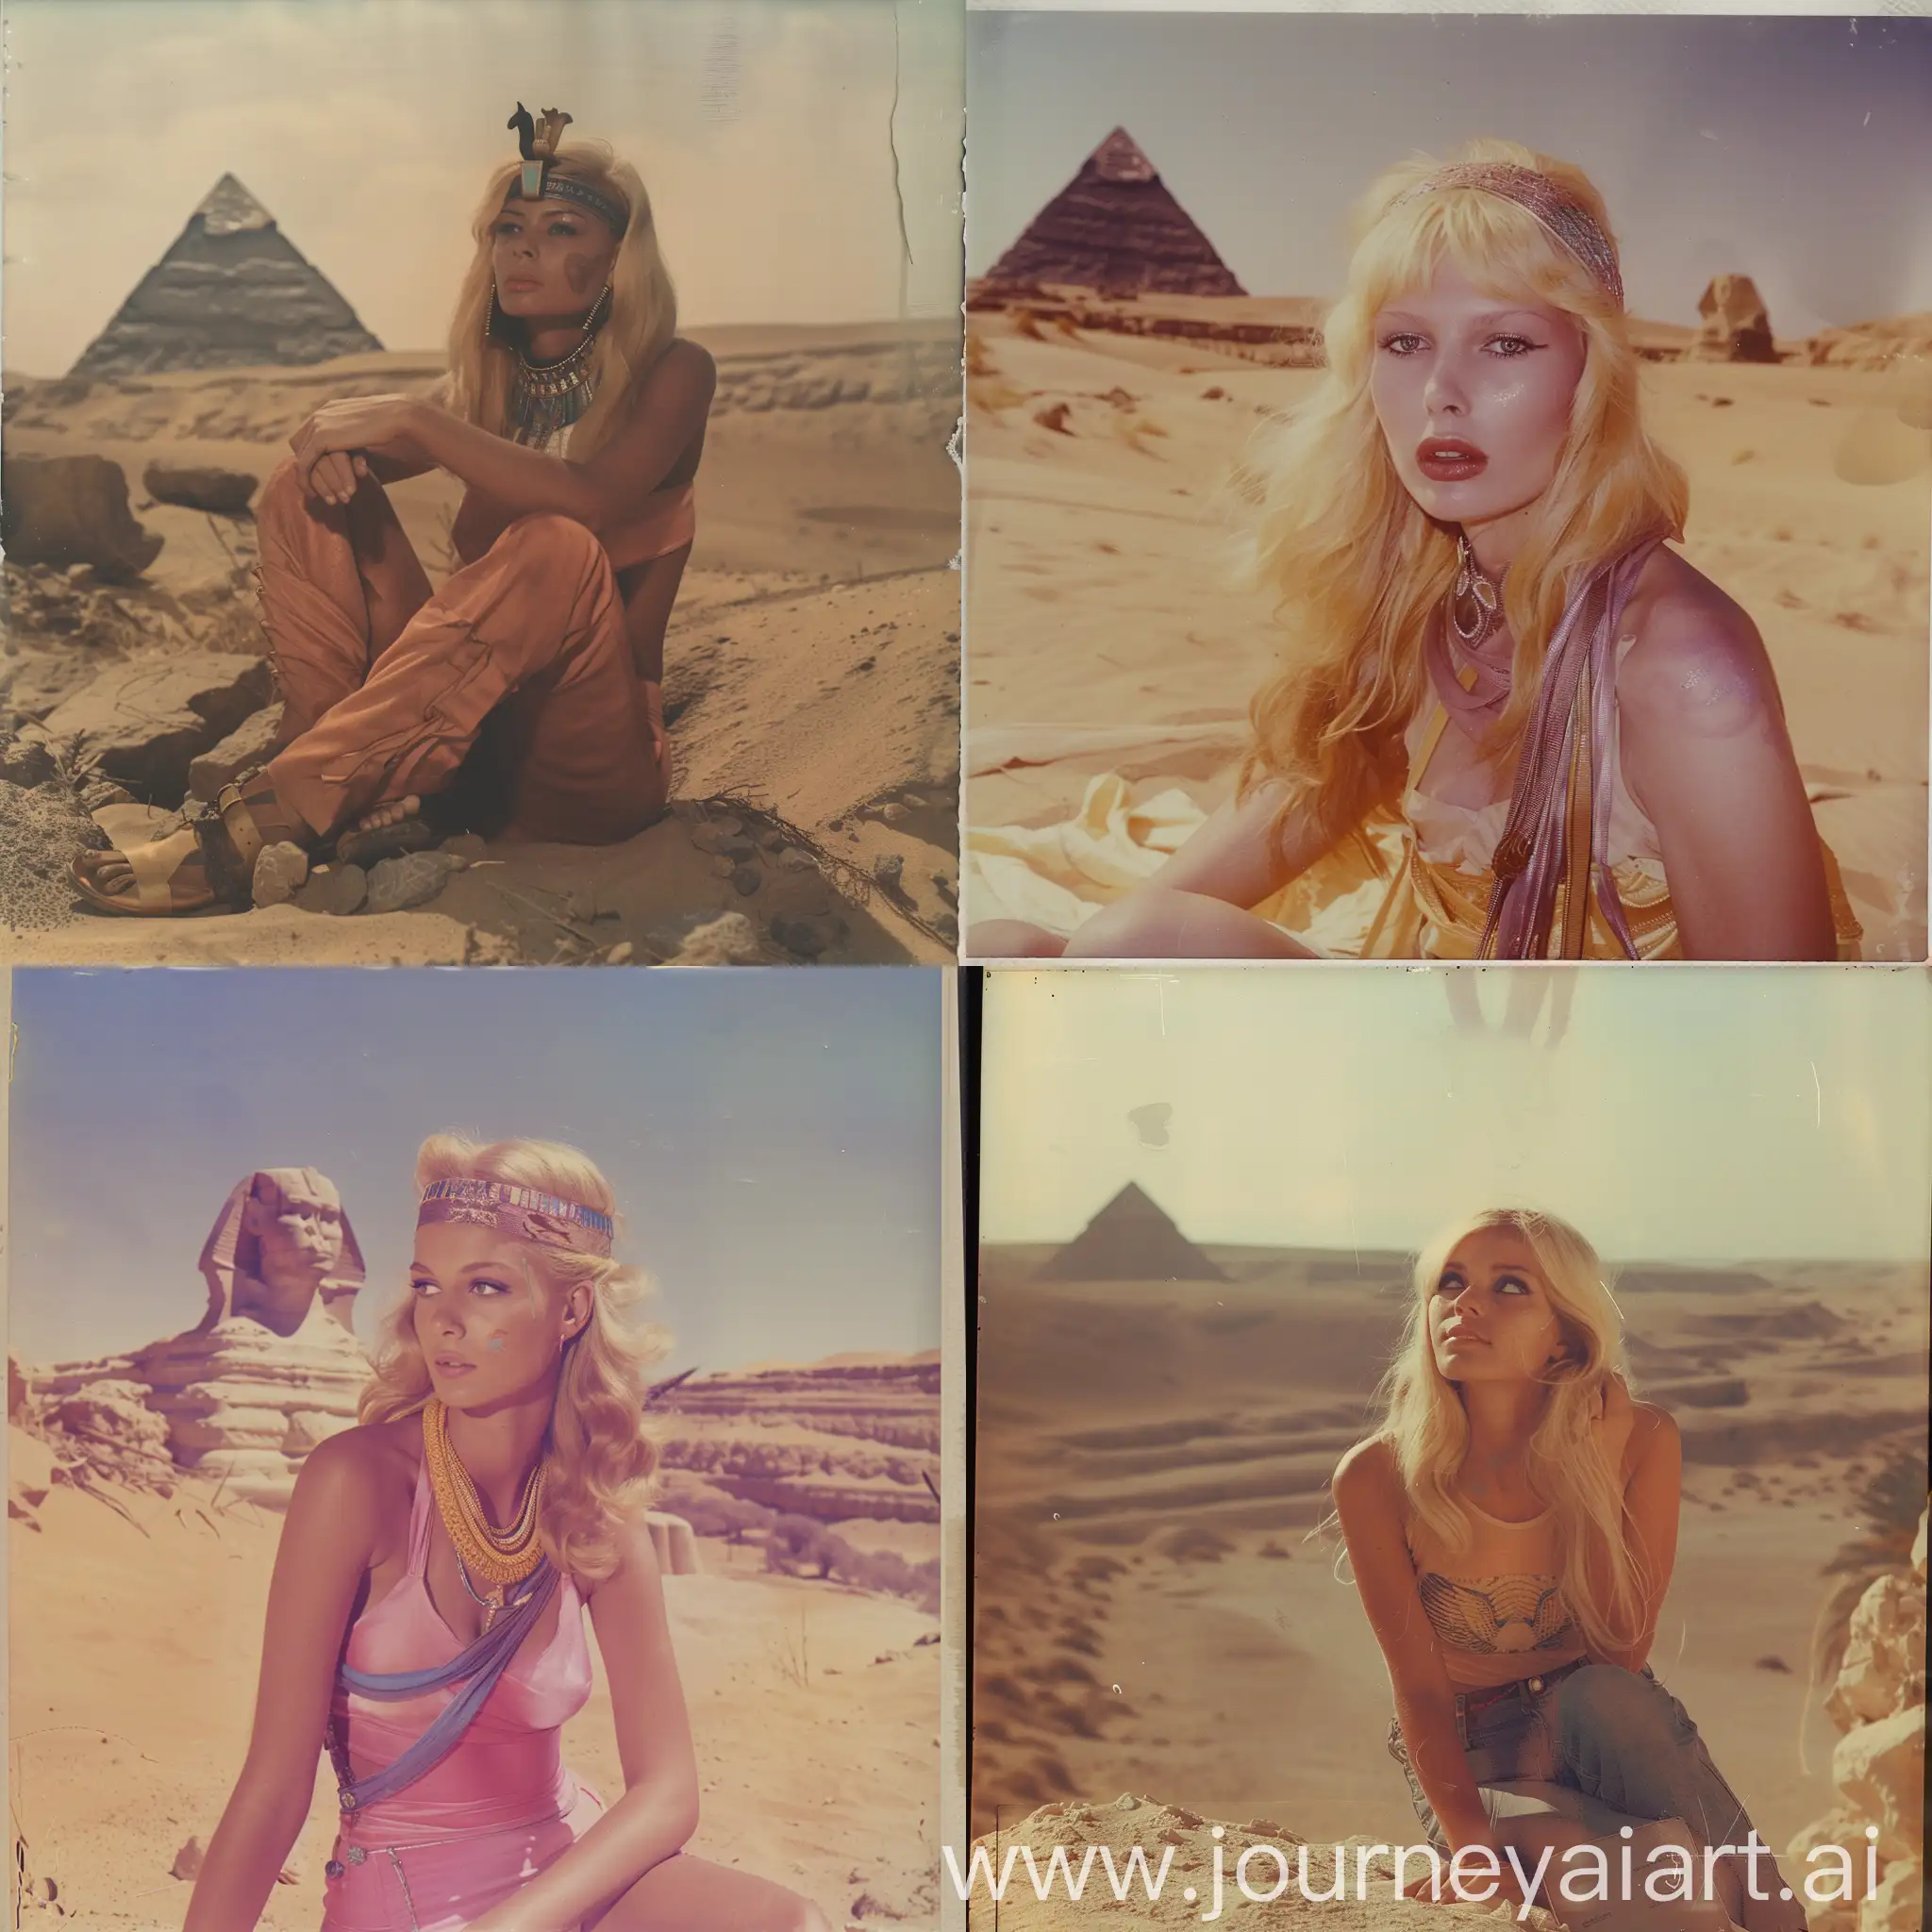 polaroid colors, shirtless pharaoh queen, beauty mystery, sixties magazine, beautiful face and skin, Emmanuelle, Cleopatra, desert, Sphinx, European blonde top model, shooting